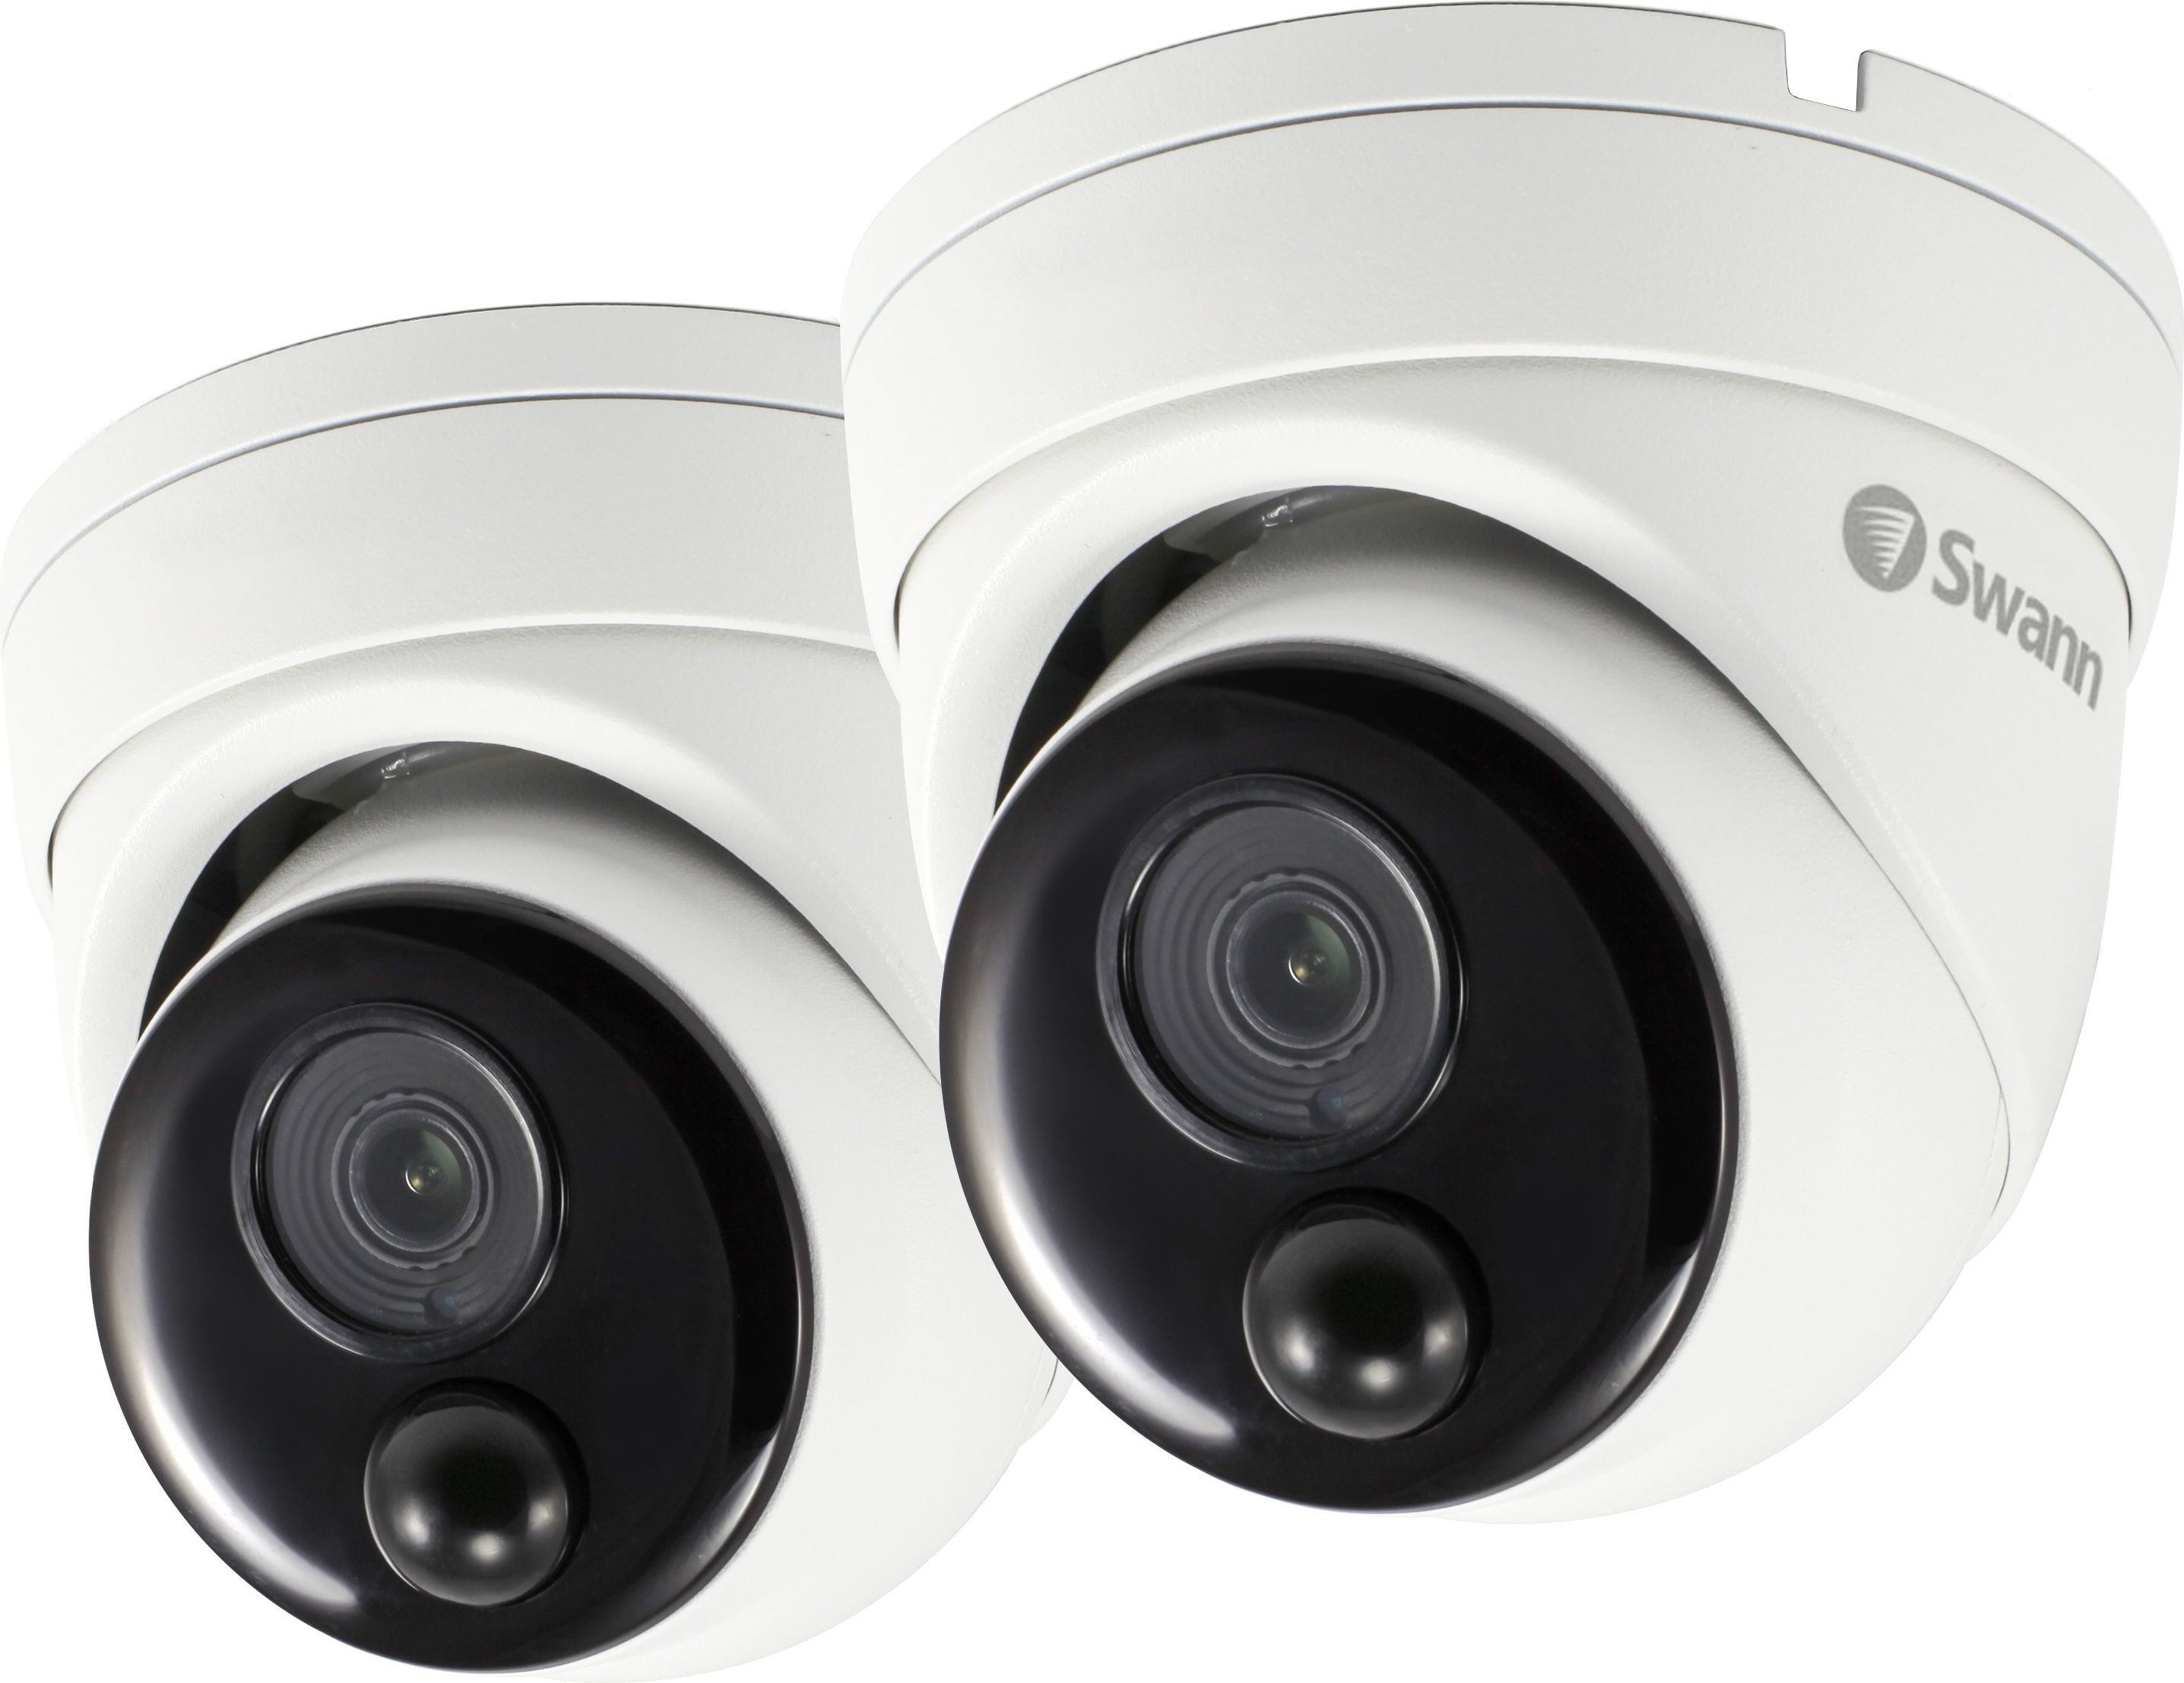 Swann Add on Dome Camera 2 Pack Full HD 1080p Smart Home Security Camera - White, White